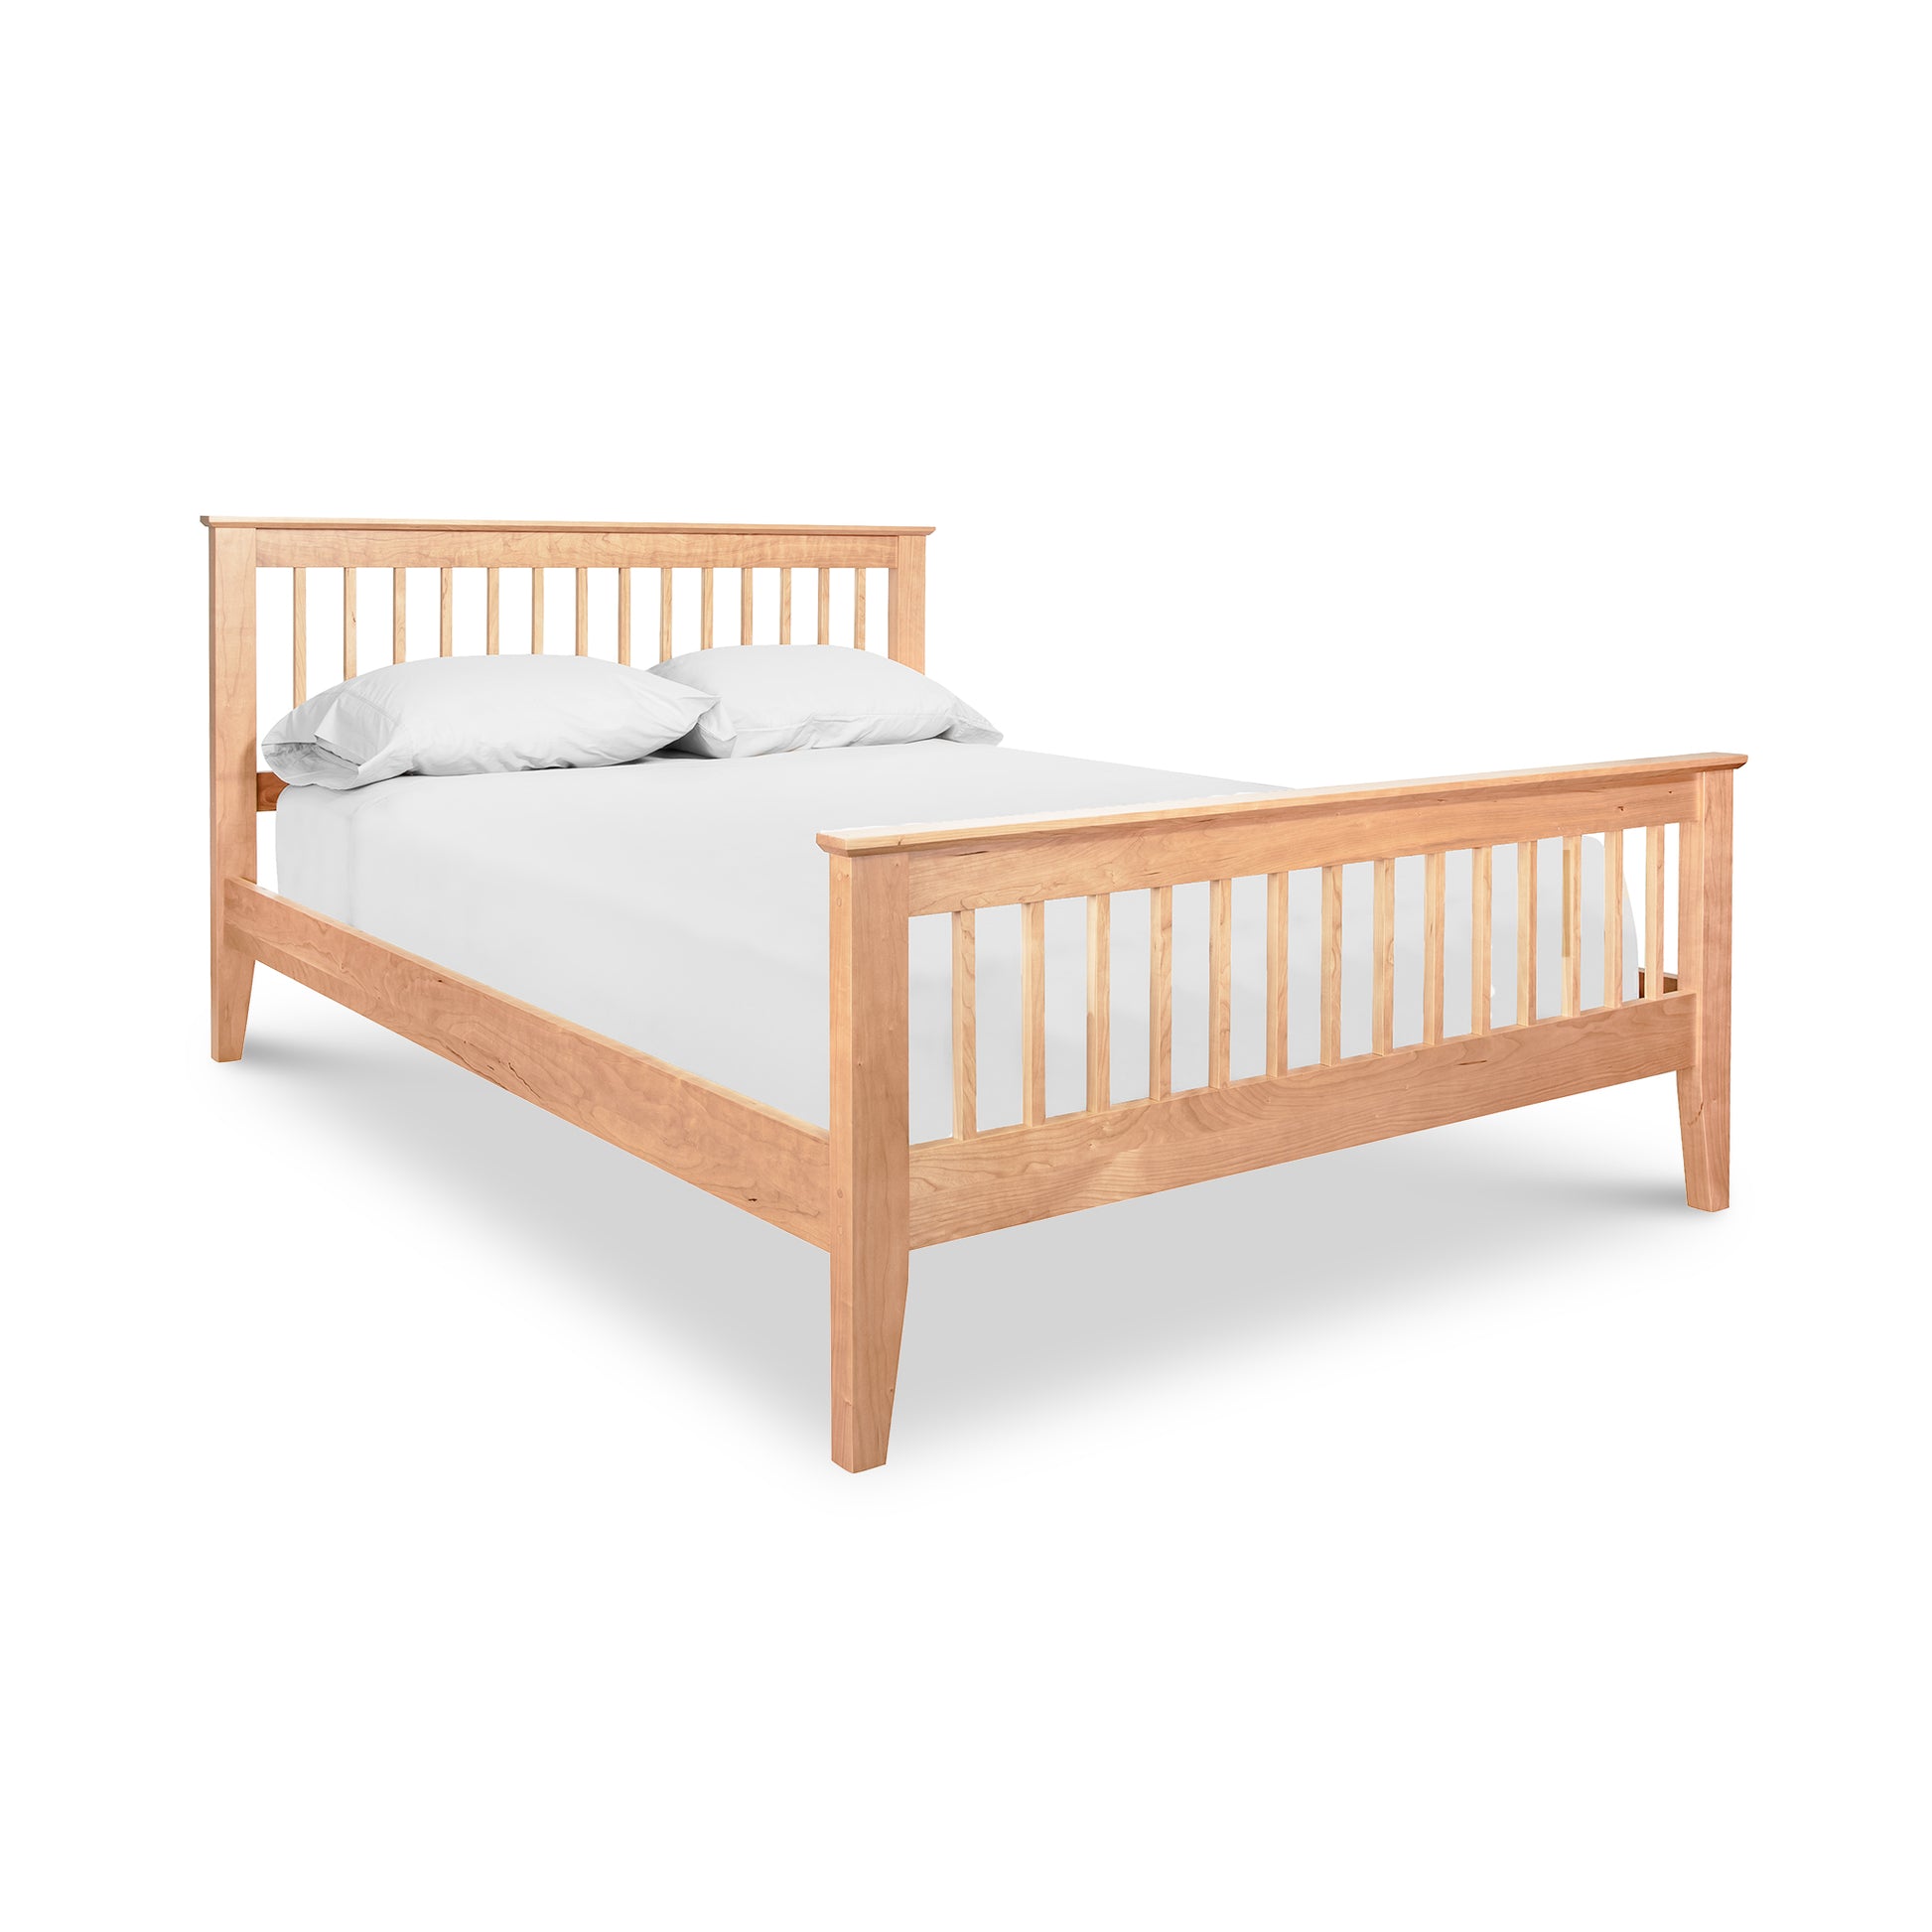 A high-quality wooden Lyndon Furniture American Mission bed adorned with white sheets.